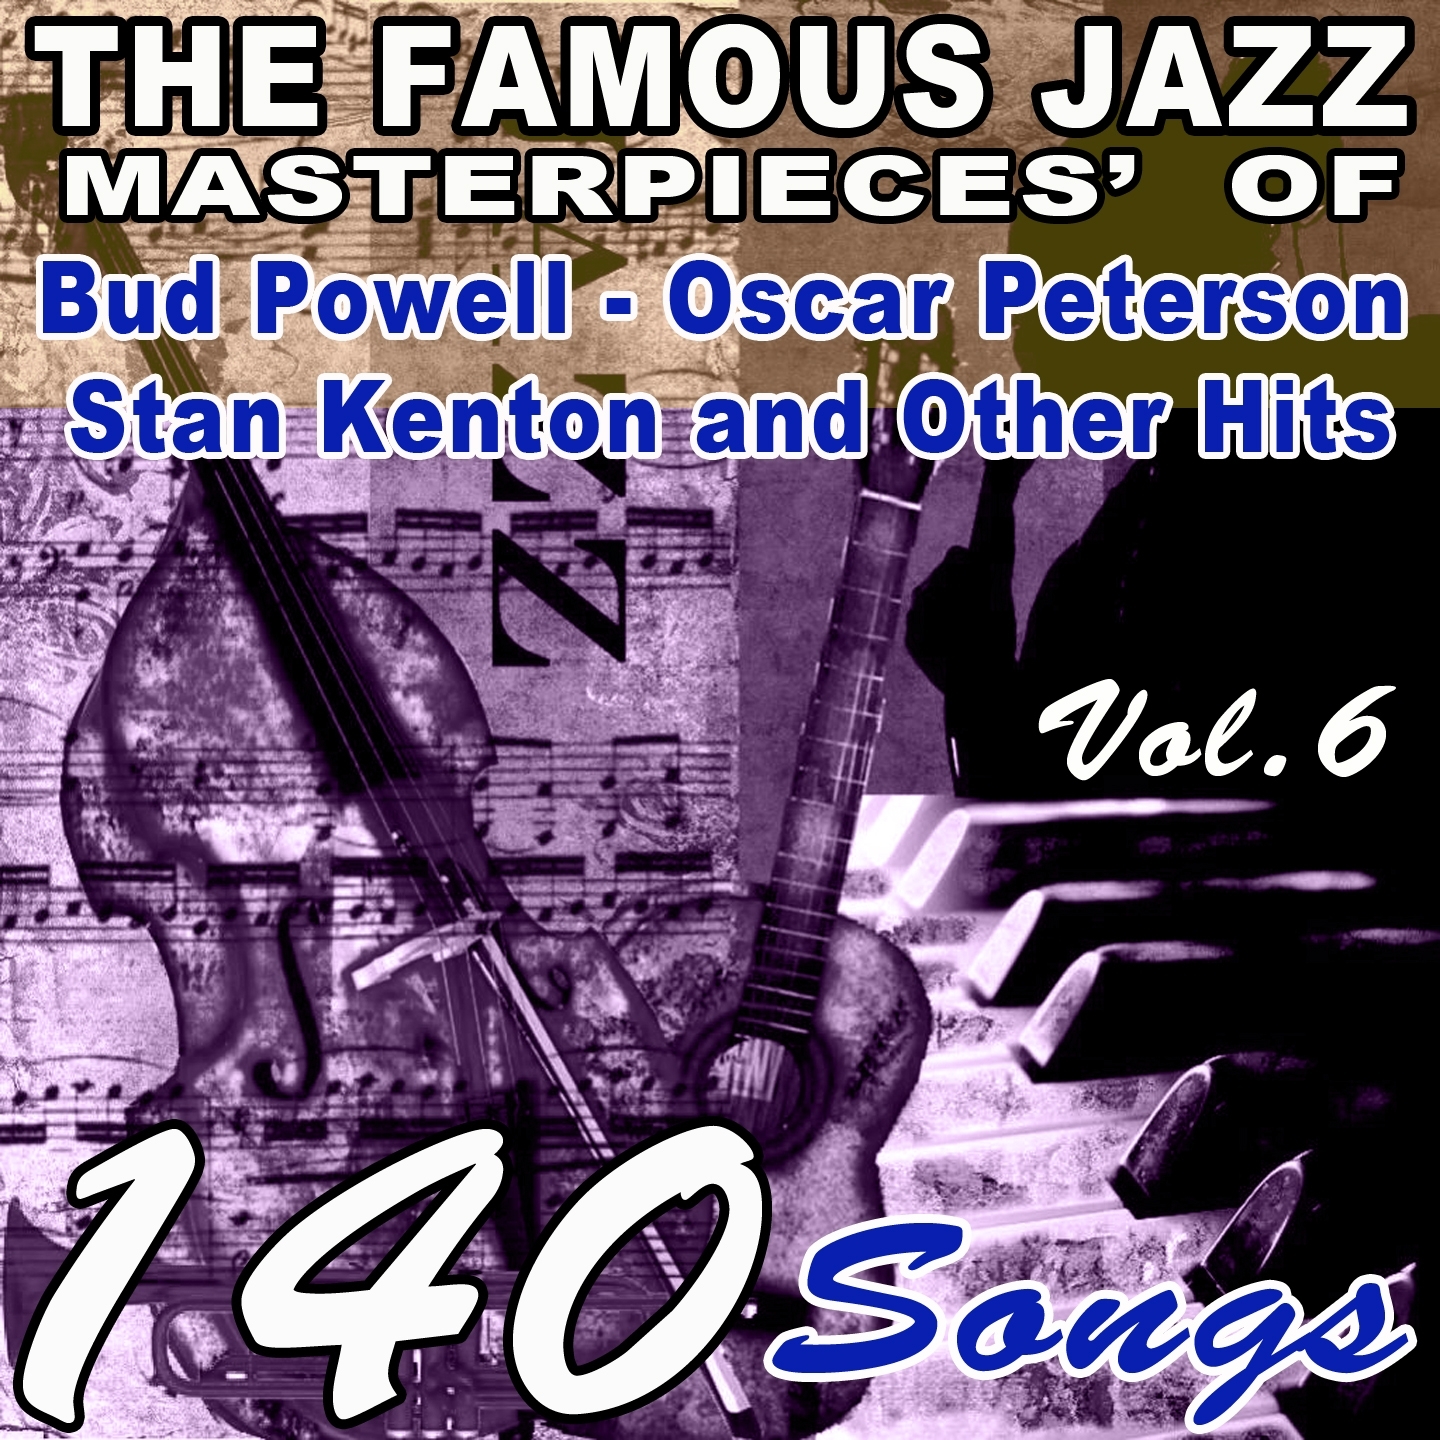 The Famous Blues Masterpieces' of Bud Powell, Oscar Peterson, Stan Kenton and Other Hits, Vol. 6 (140 Songs)